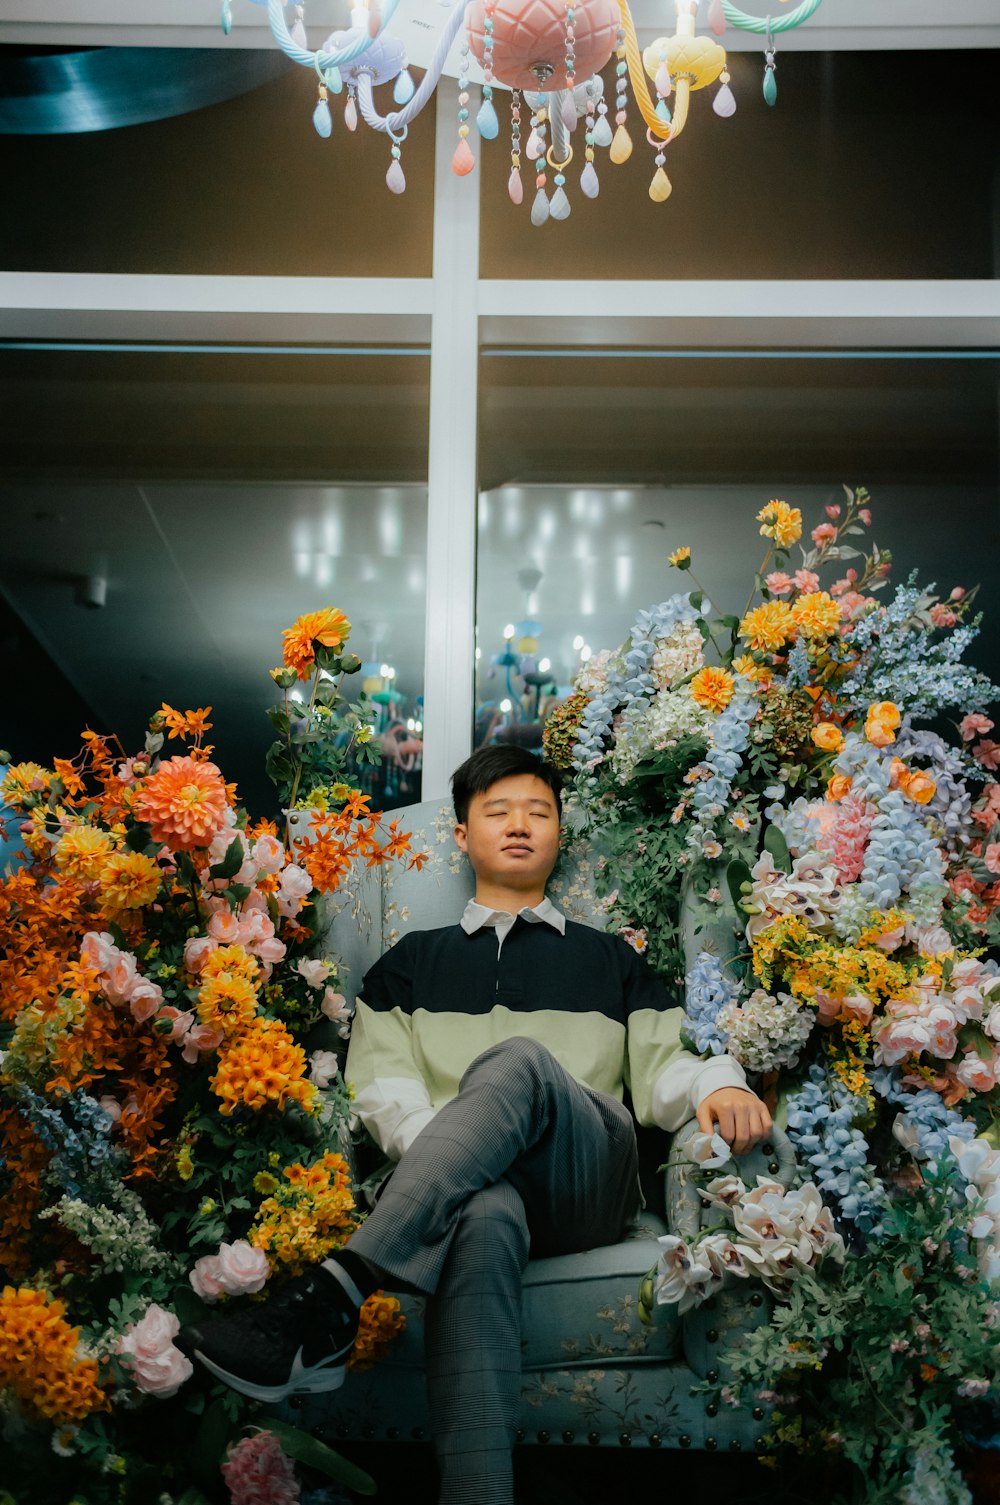 a man sitting in a chair surrounded by flowers